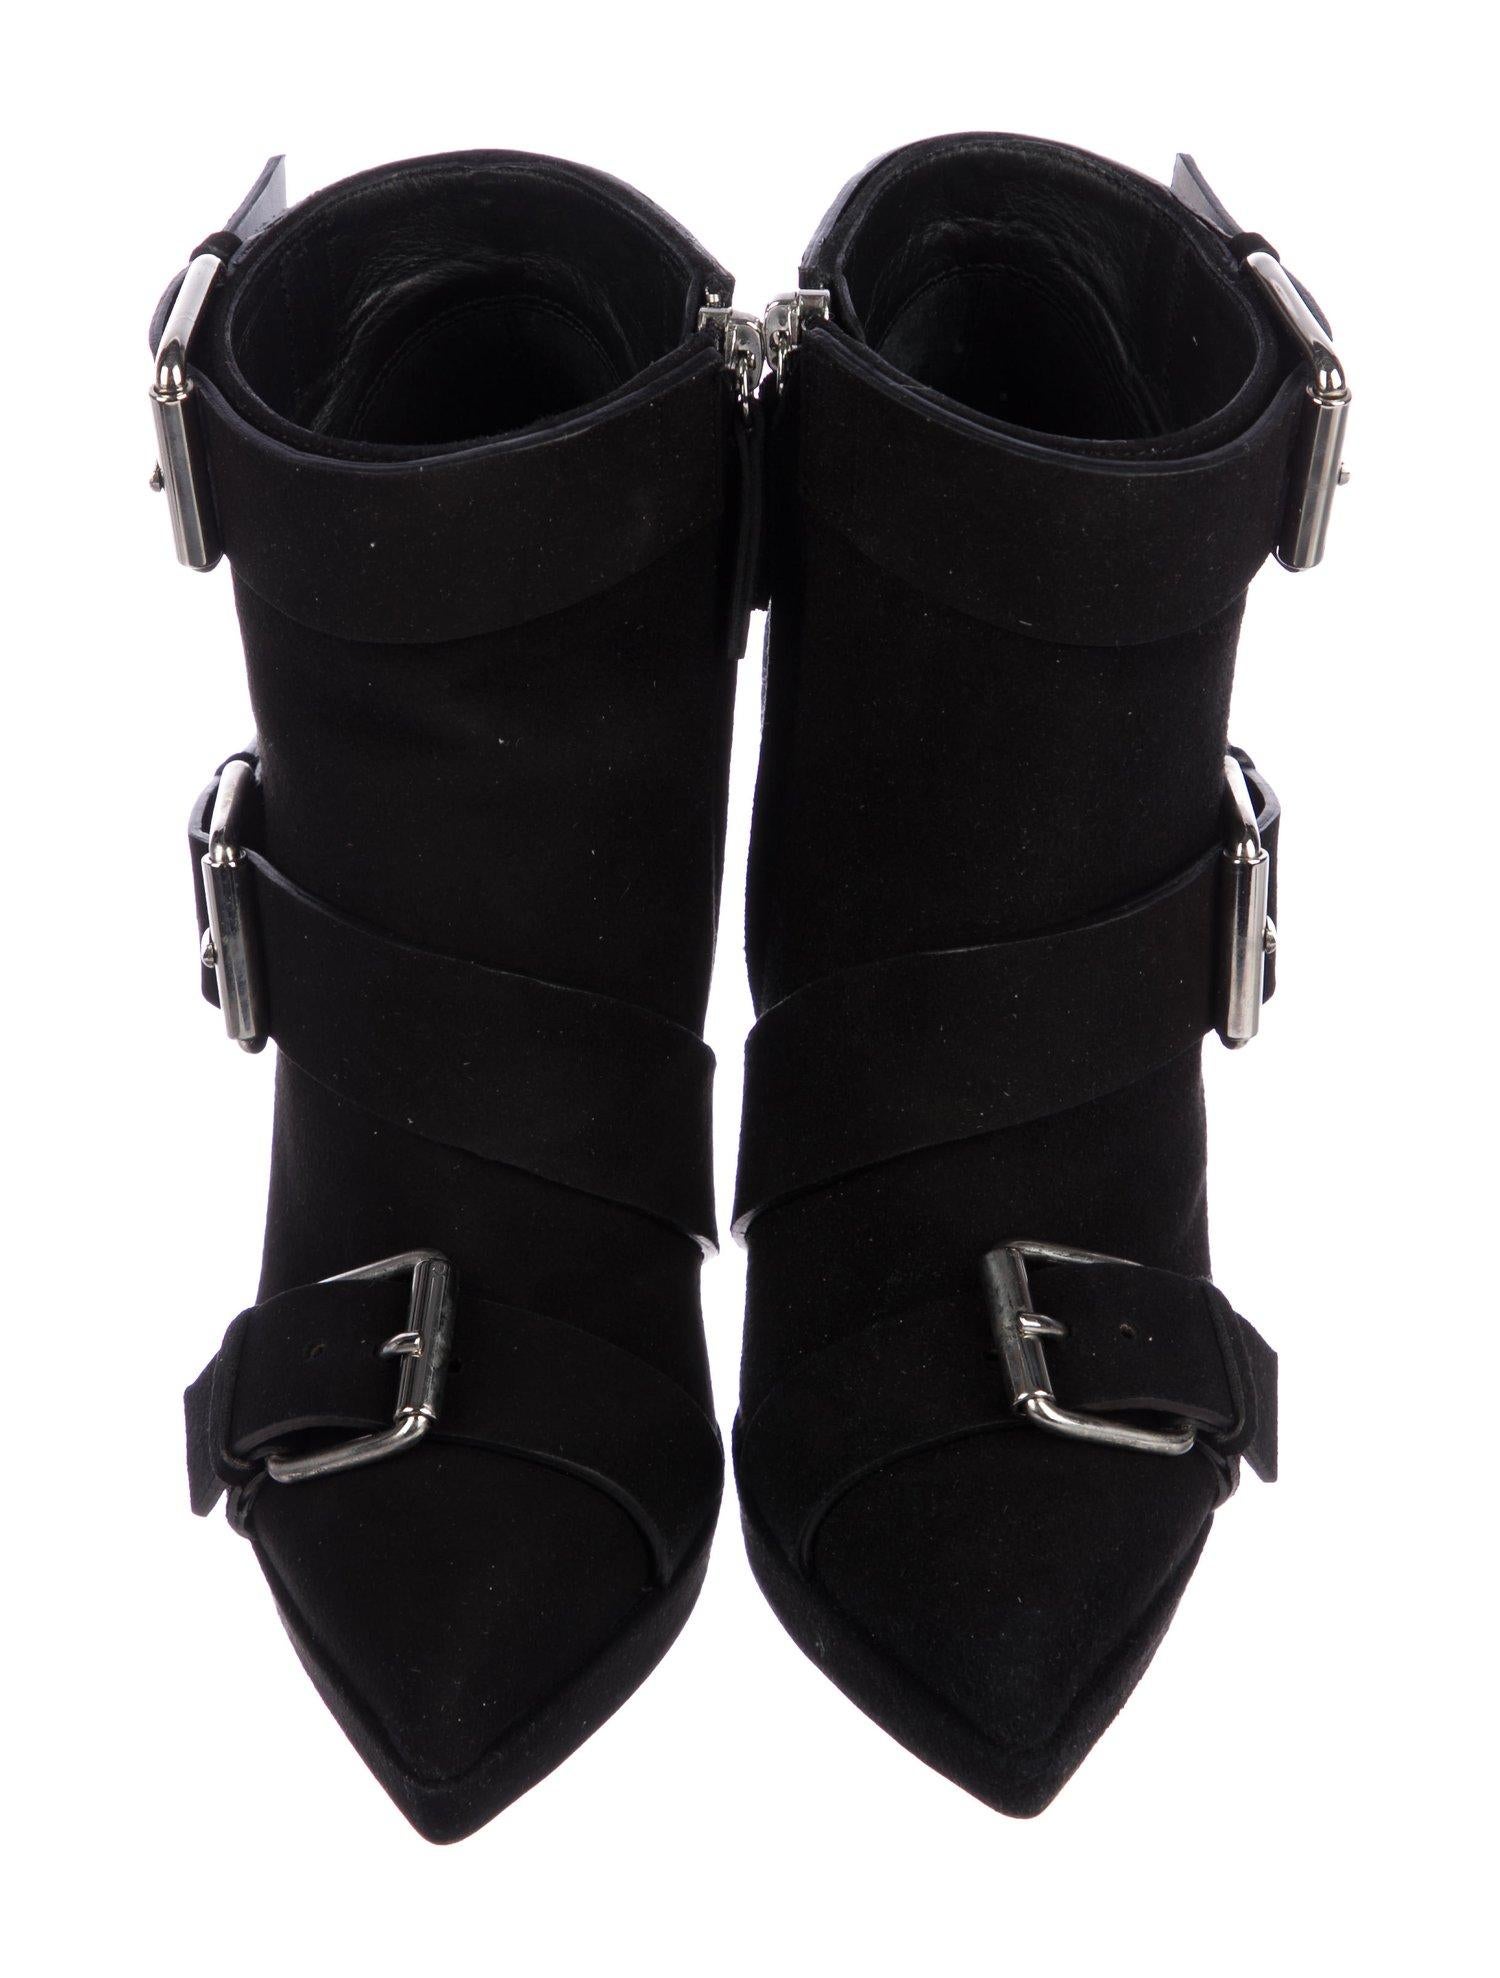 Giuseppe Zanotti NEW Black Suede Silver Biker Buckle Ankle Boots Booties in Box

Size IT 36
Suede
Silver tone hardware
Buckle and zip closures
Made in Italy
Heel height 4.5